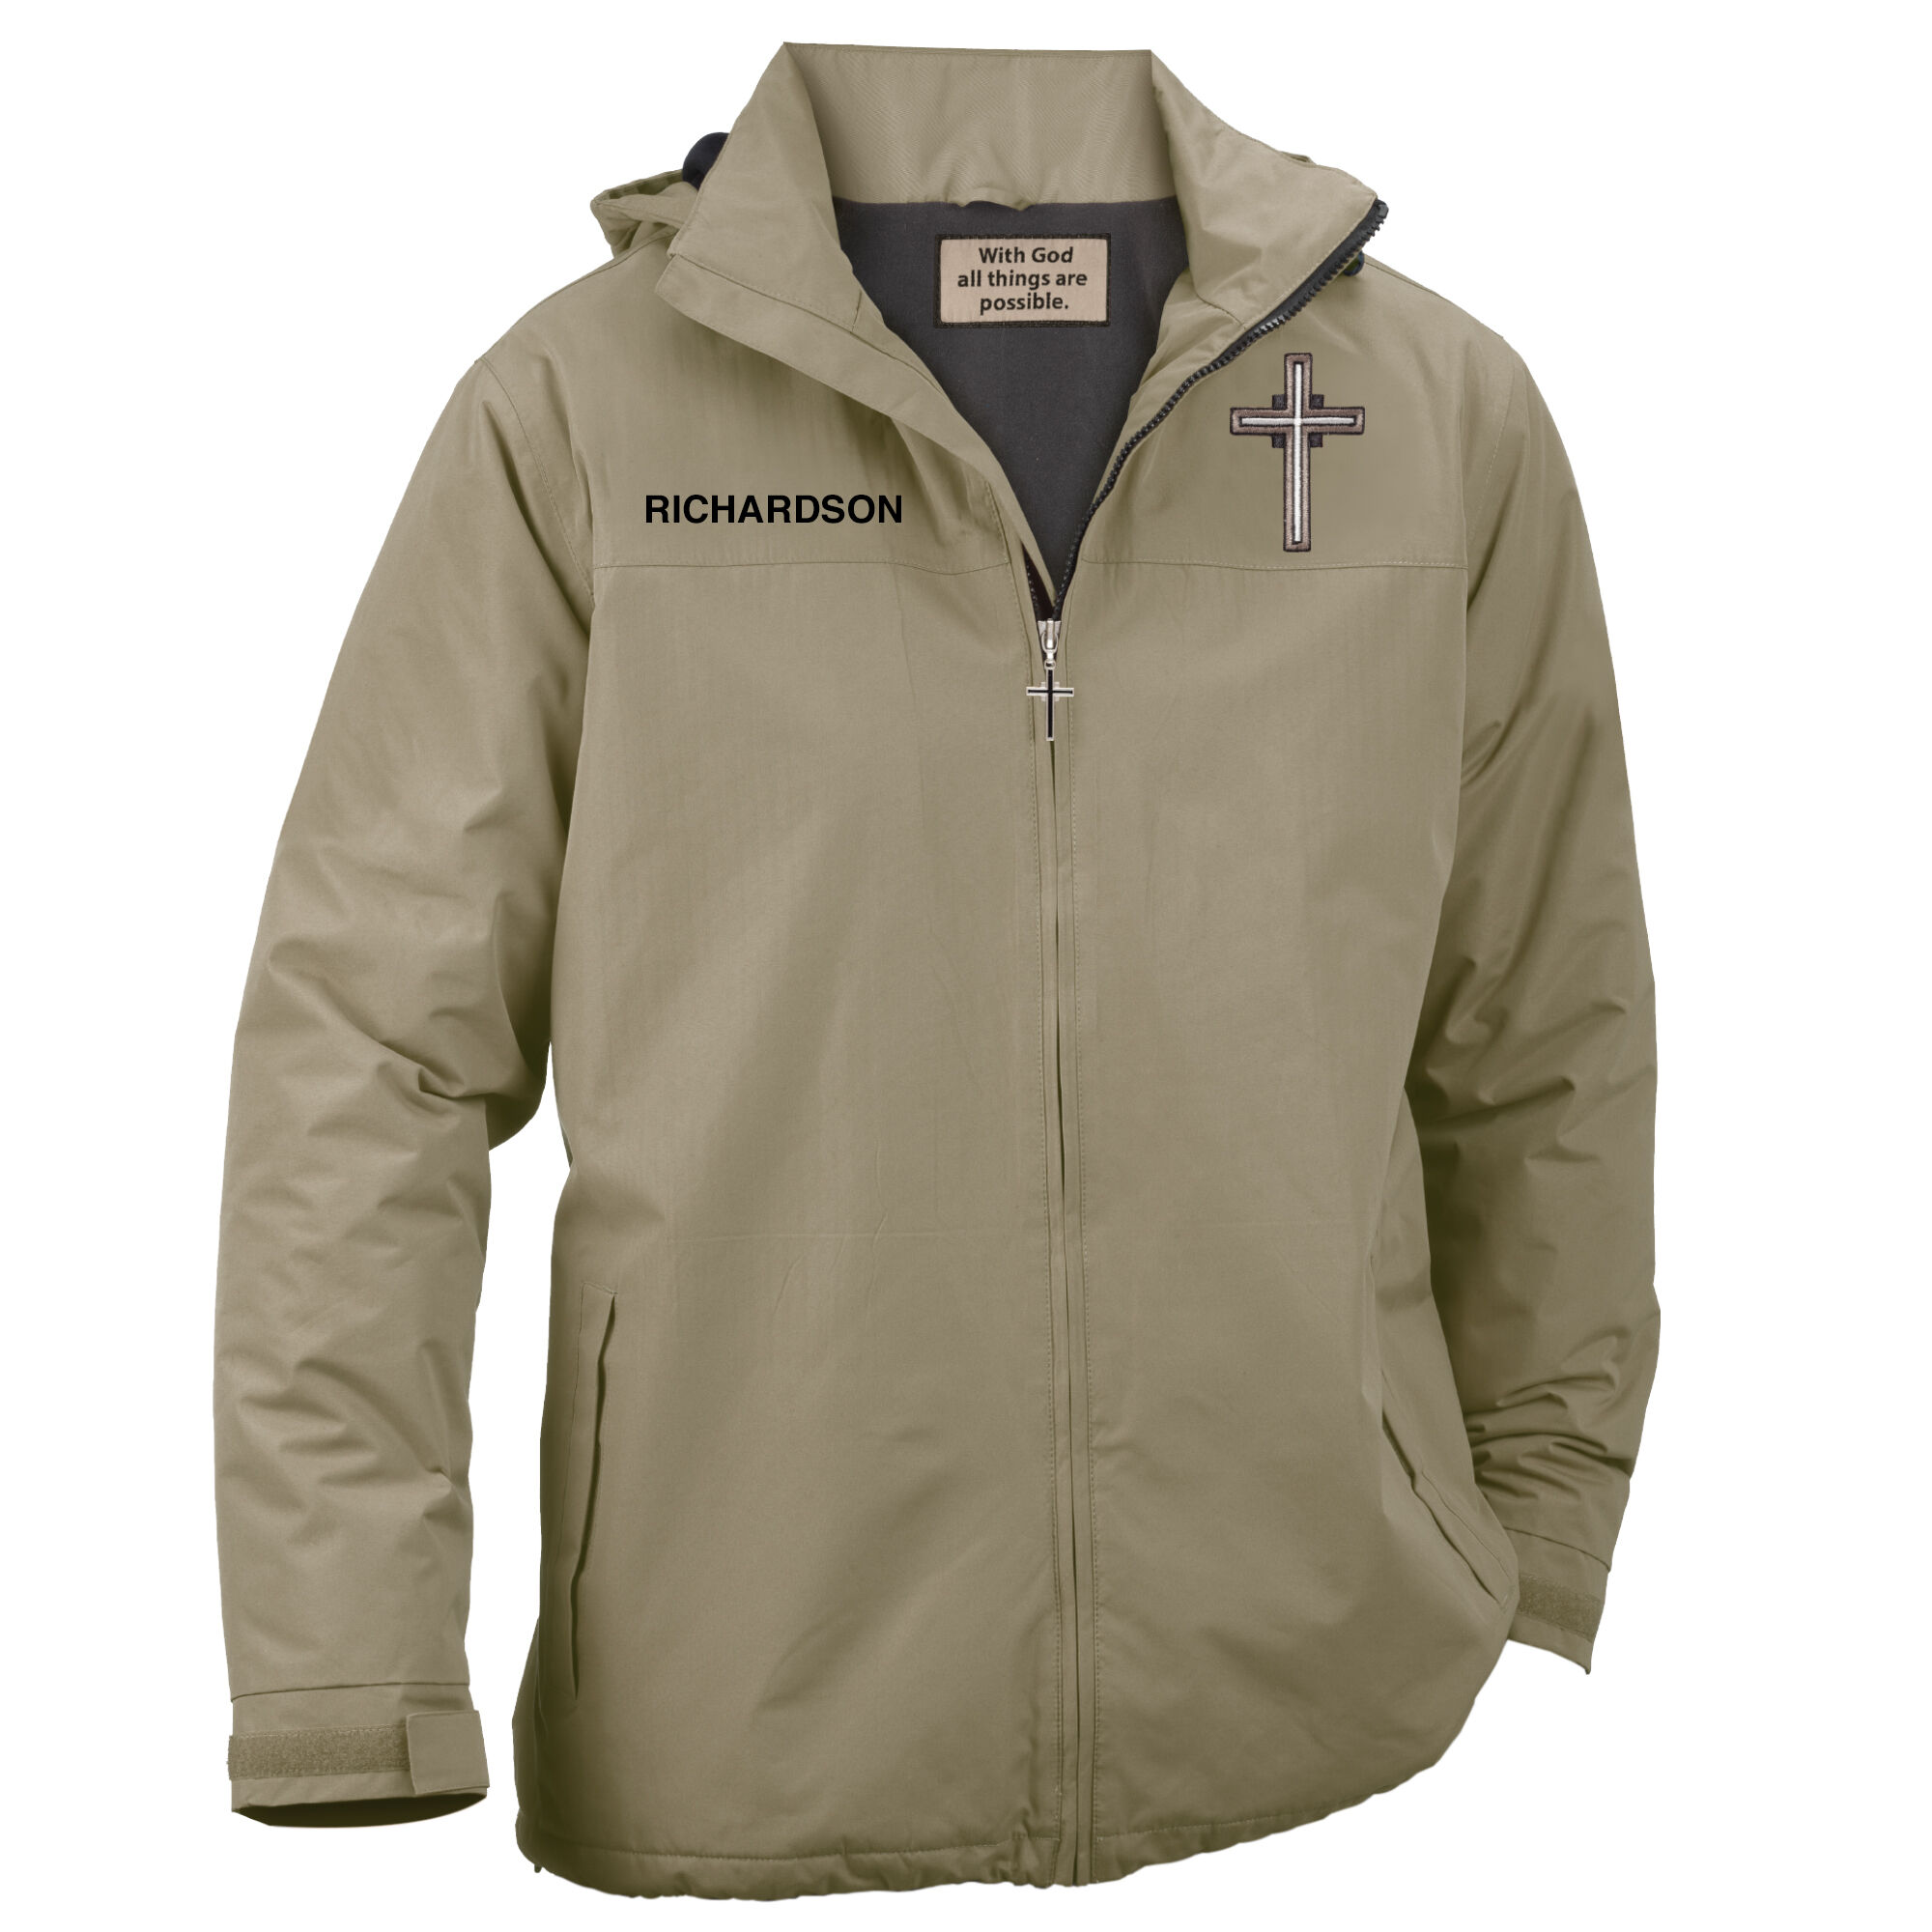 The All Things Are Possible All Weather Jacket